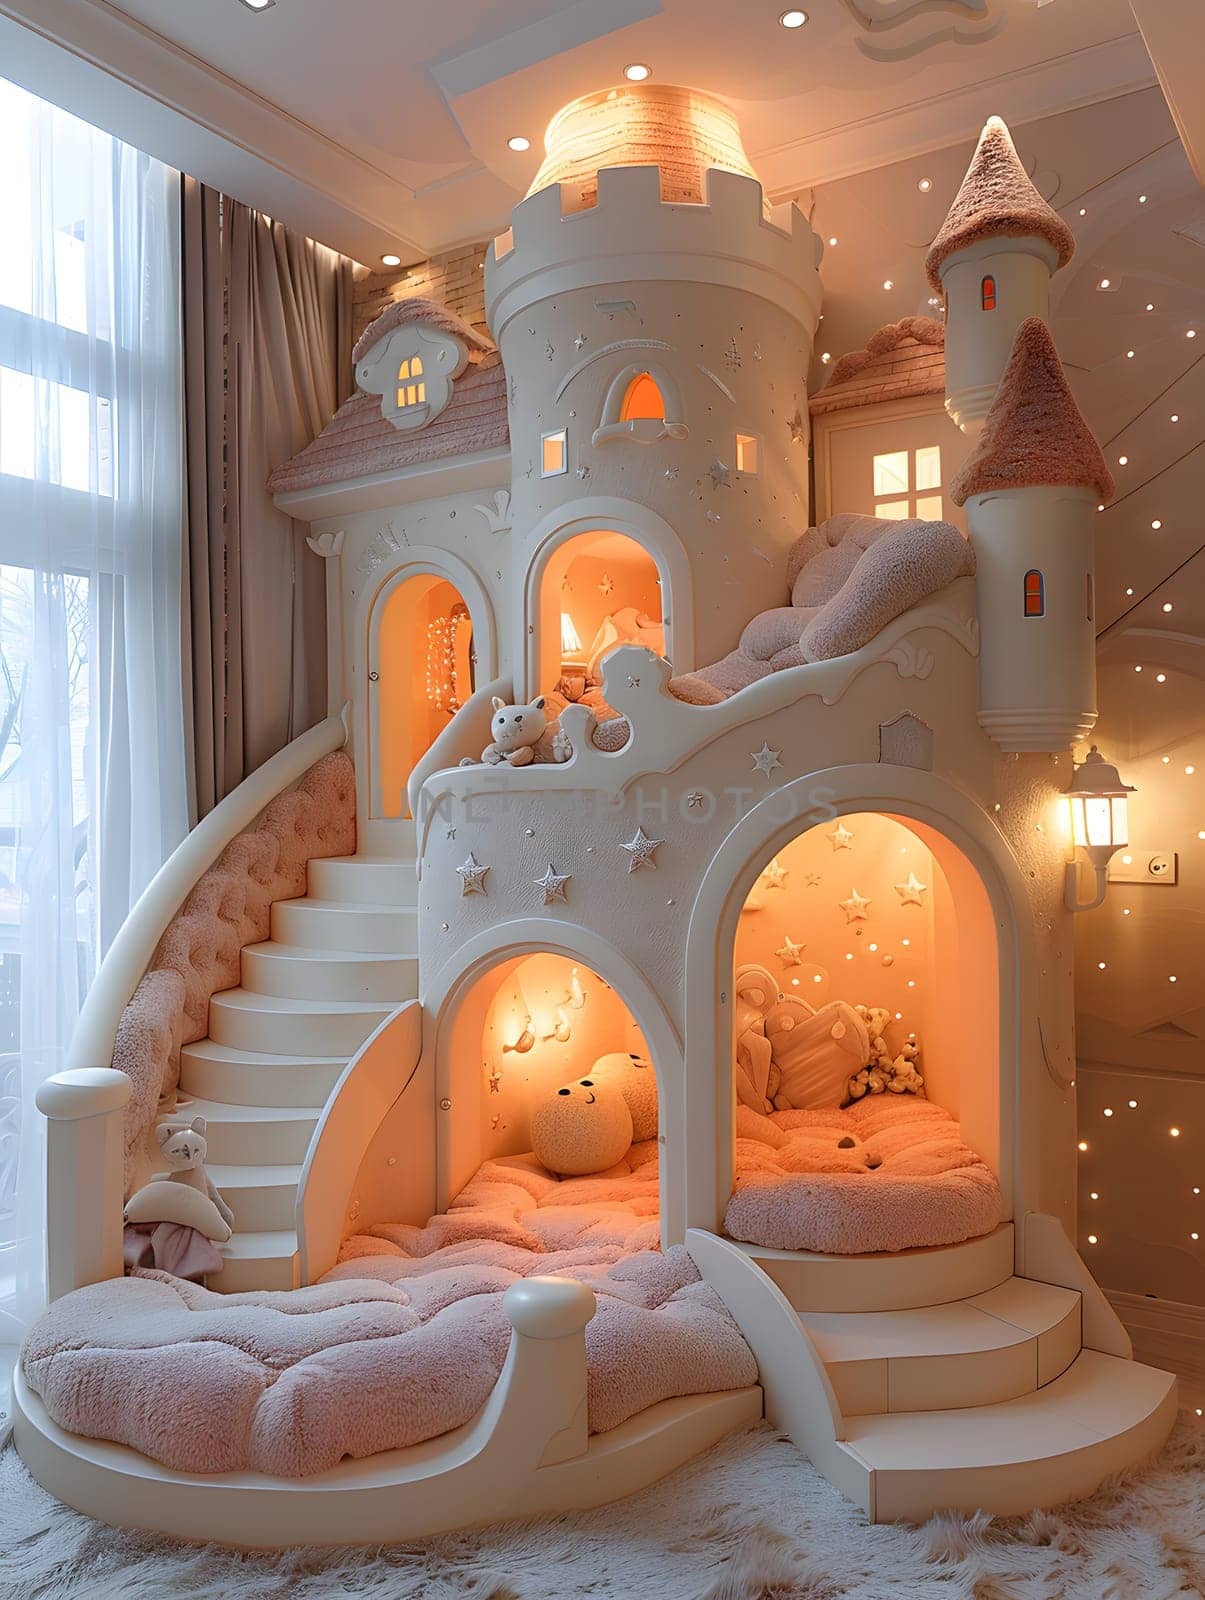 A castleshaped bed made of wood with stairs and a slide, complete with brick detailing and arches. Perfect for a childs room, adding a touch of magic and playfulness to the interior design